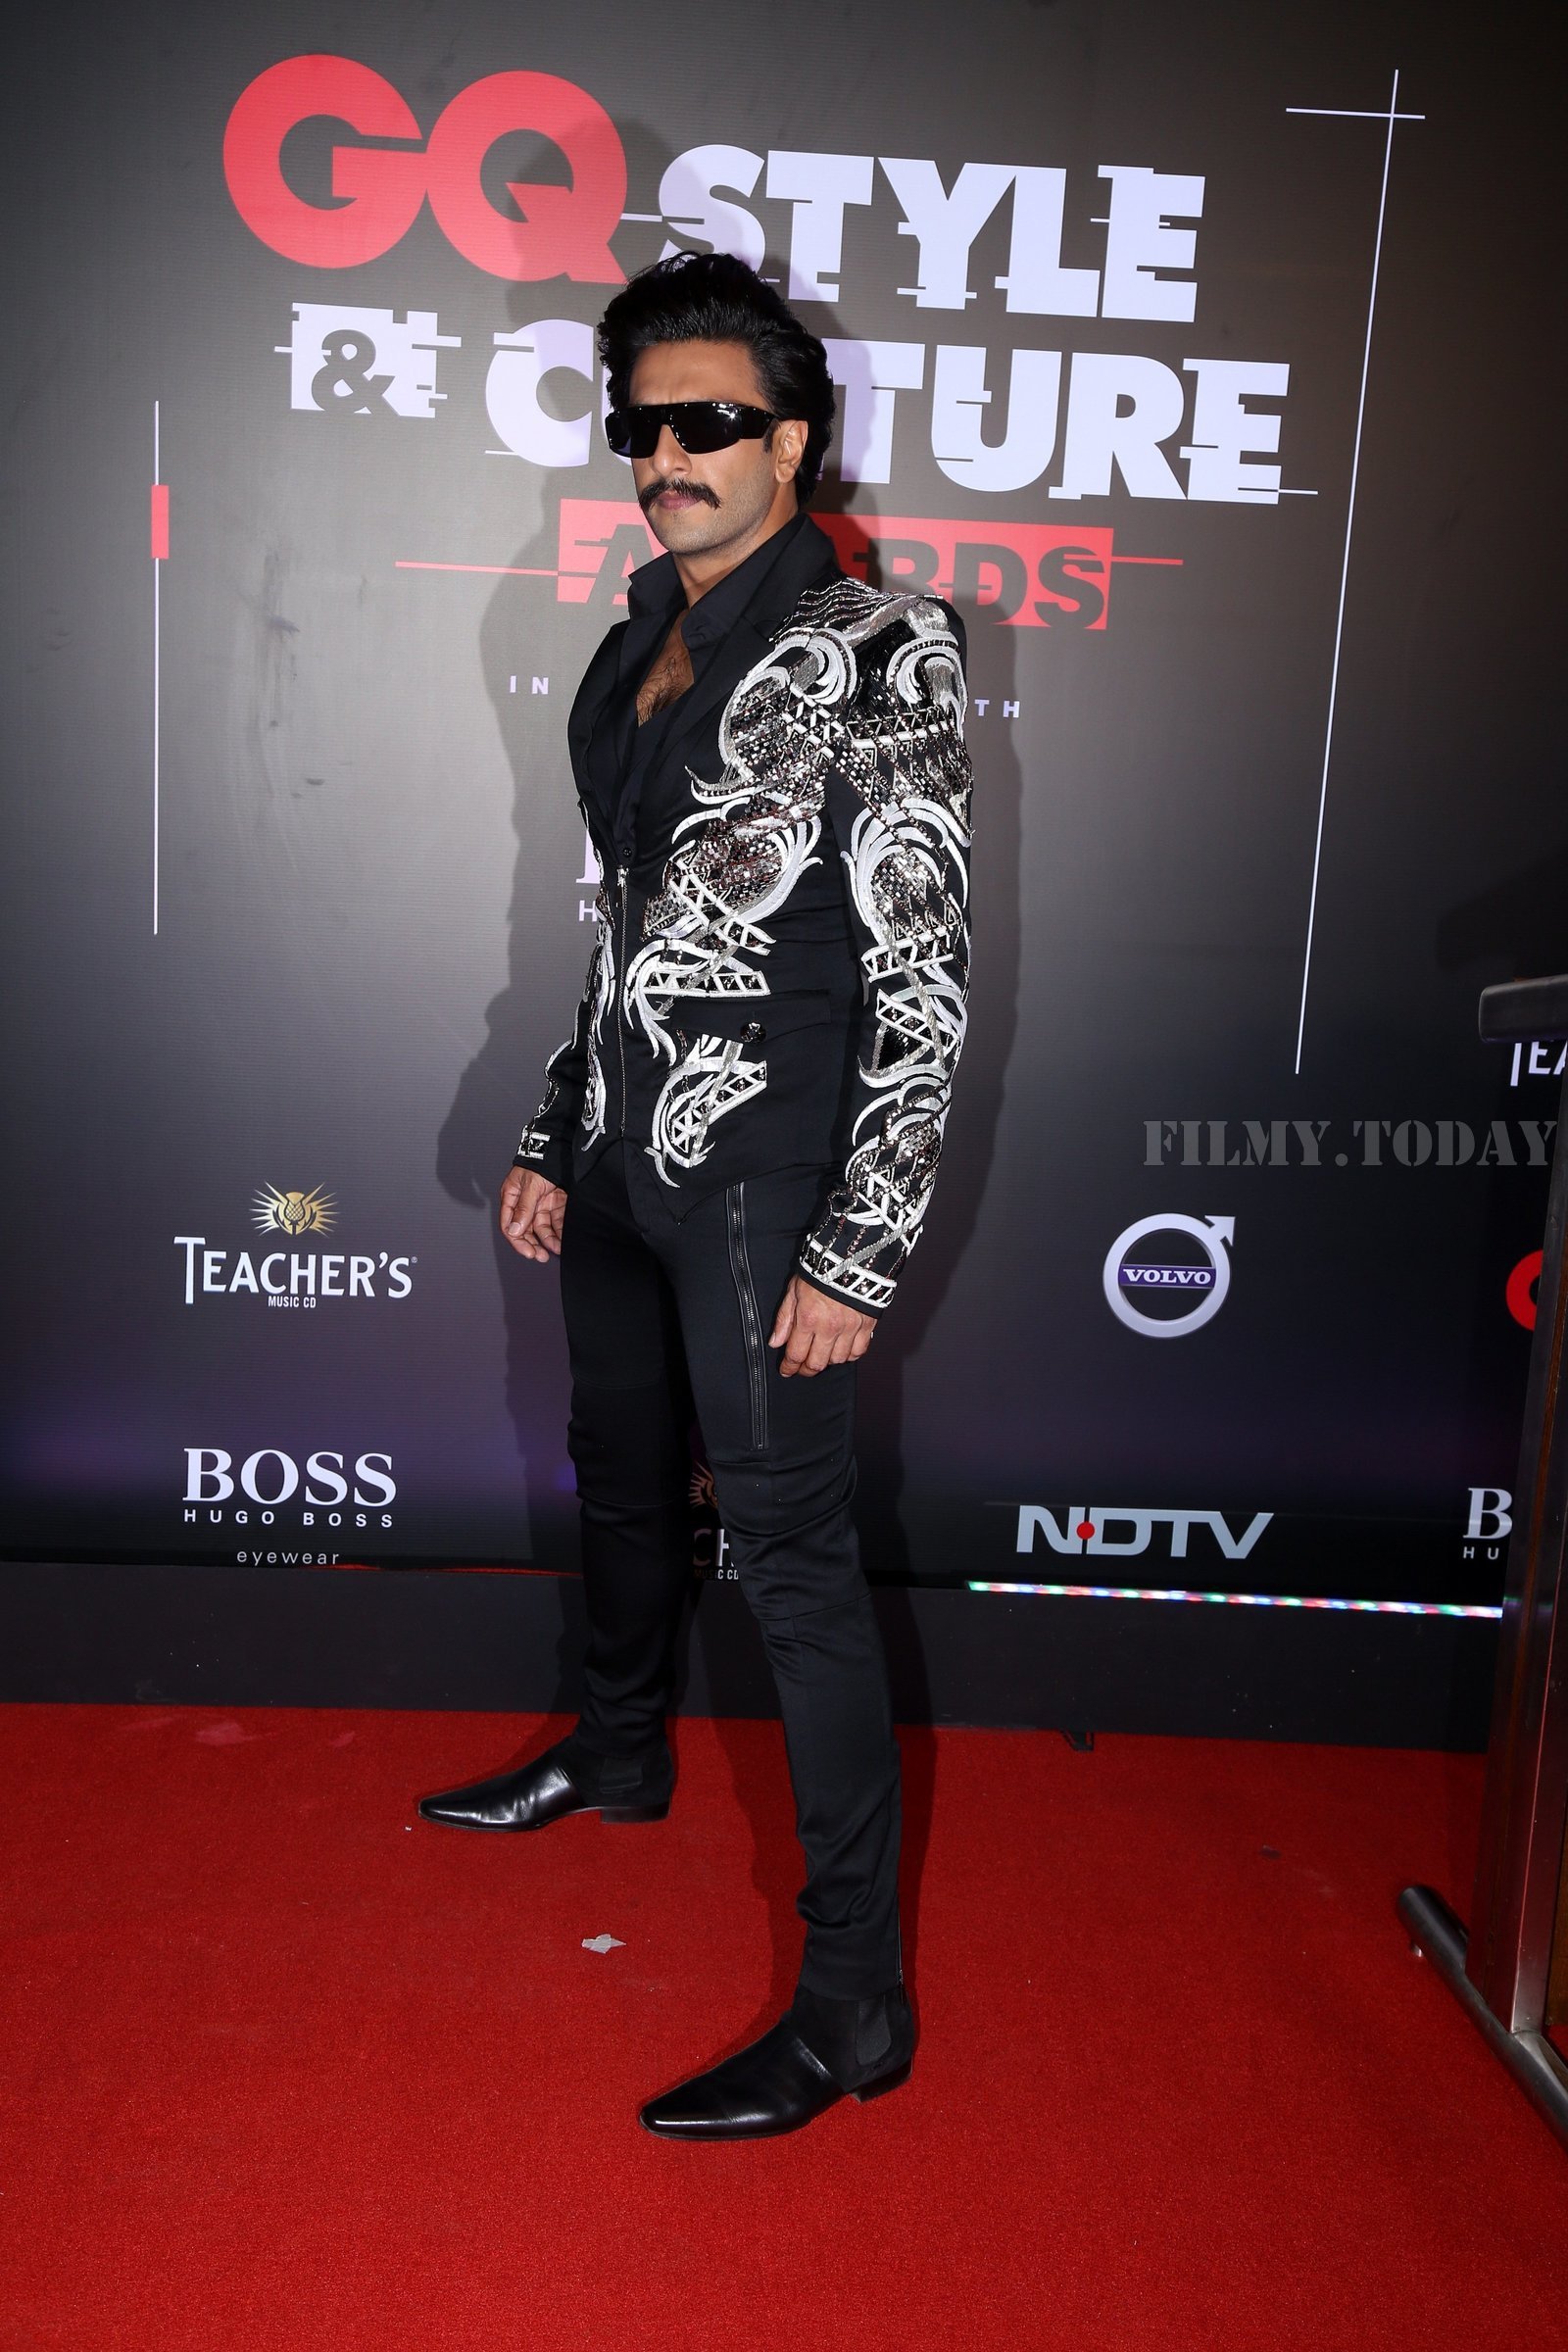 Ranveer Singh - Photos: GQ Style & Culture Awards 2019 at Taj Lands End | Picture 1640184